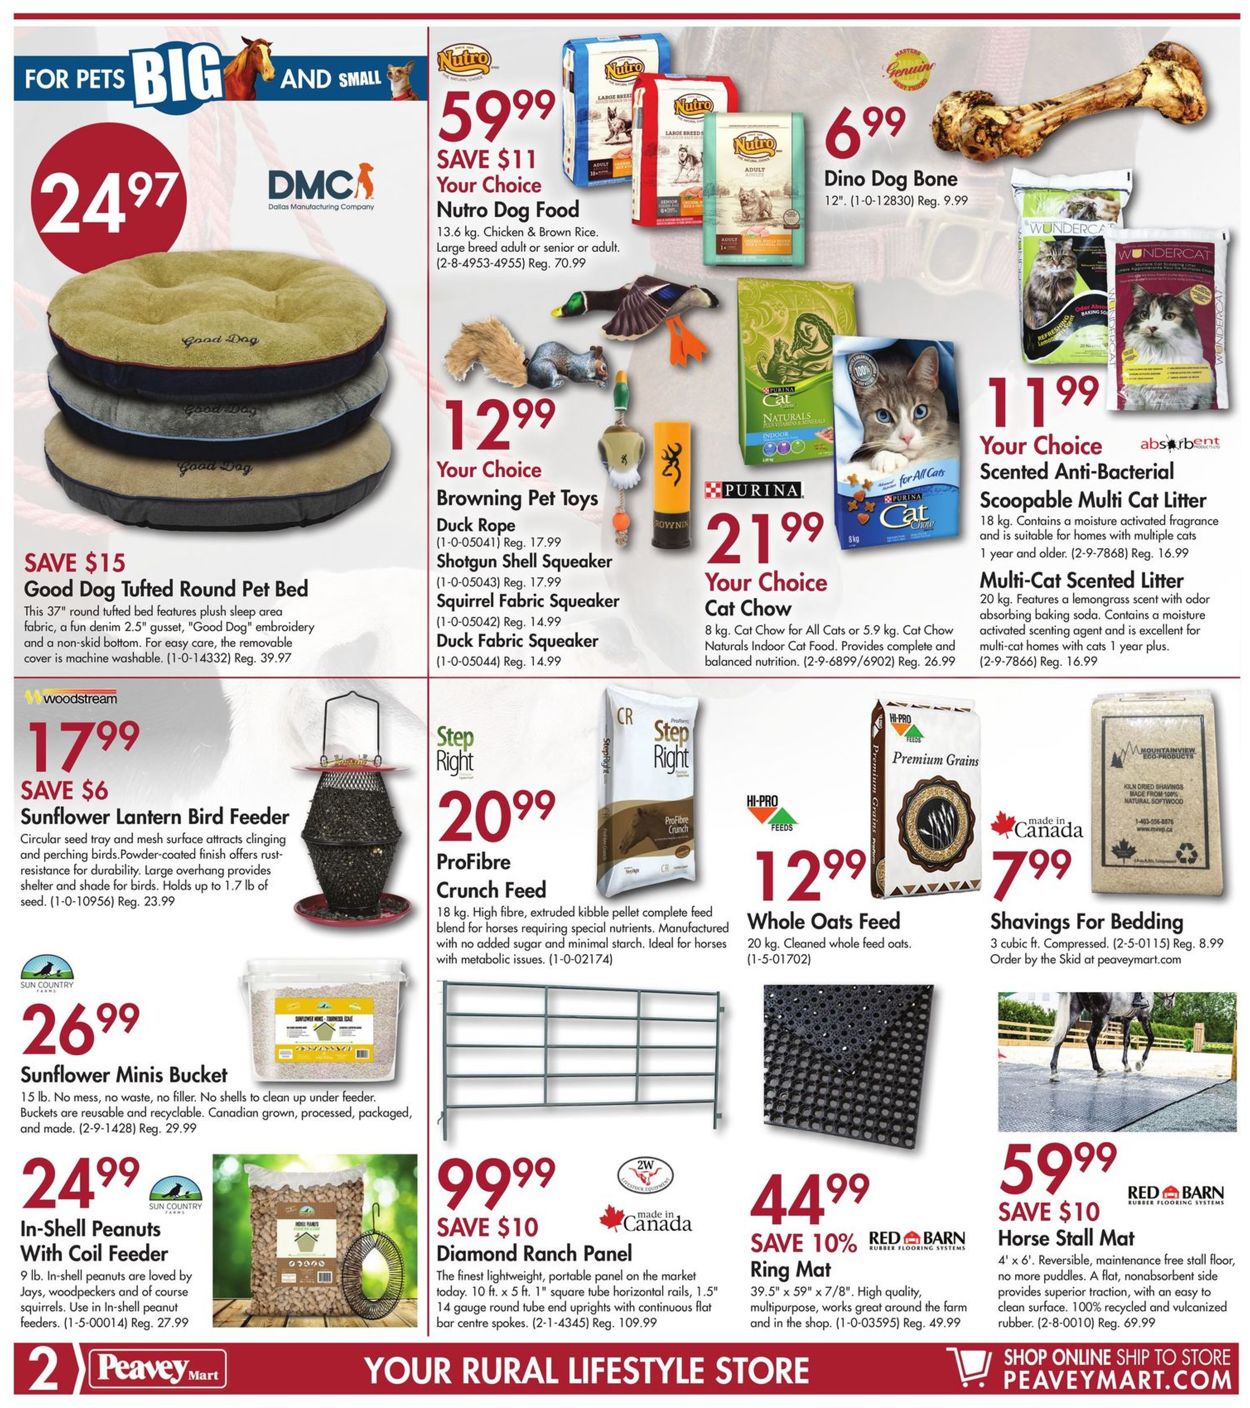 Peavey Mart Flyer from 07/12/2019